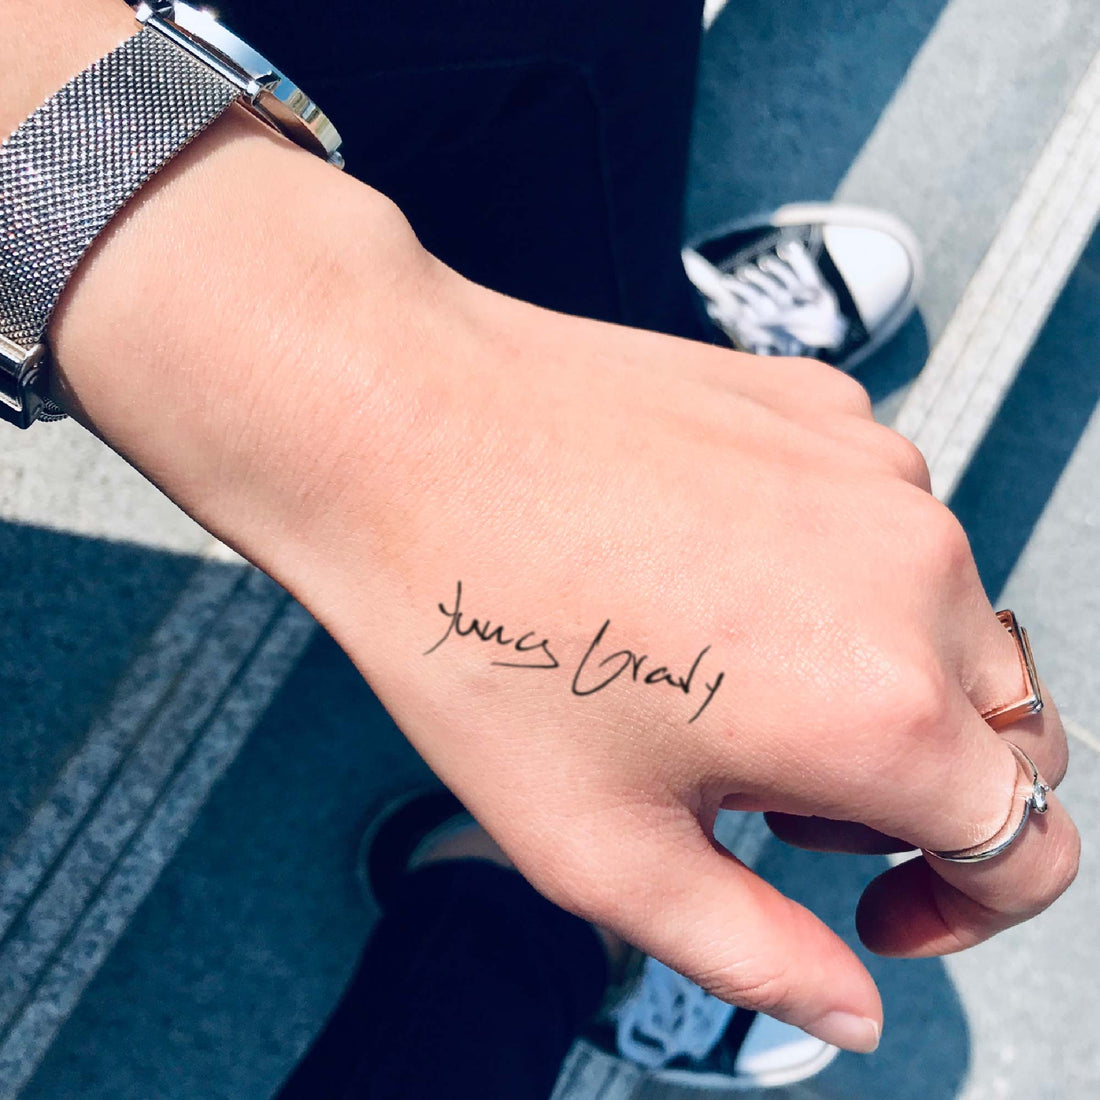 Yung Gravy custom temporary tattoo sticker design idea inspiration meanings removal arm wrist hand words font name signature calligraphy lyrics tour concert outfits merch accessory gift souvenir costumes wear dress up code